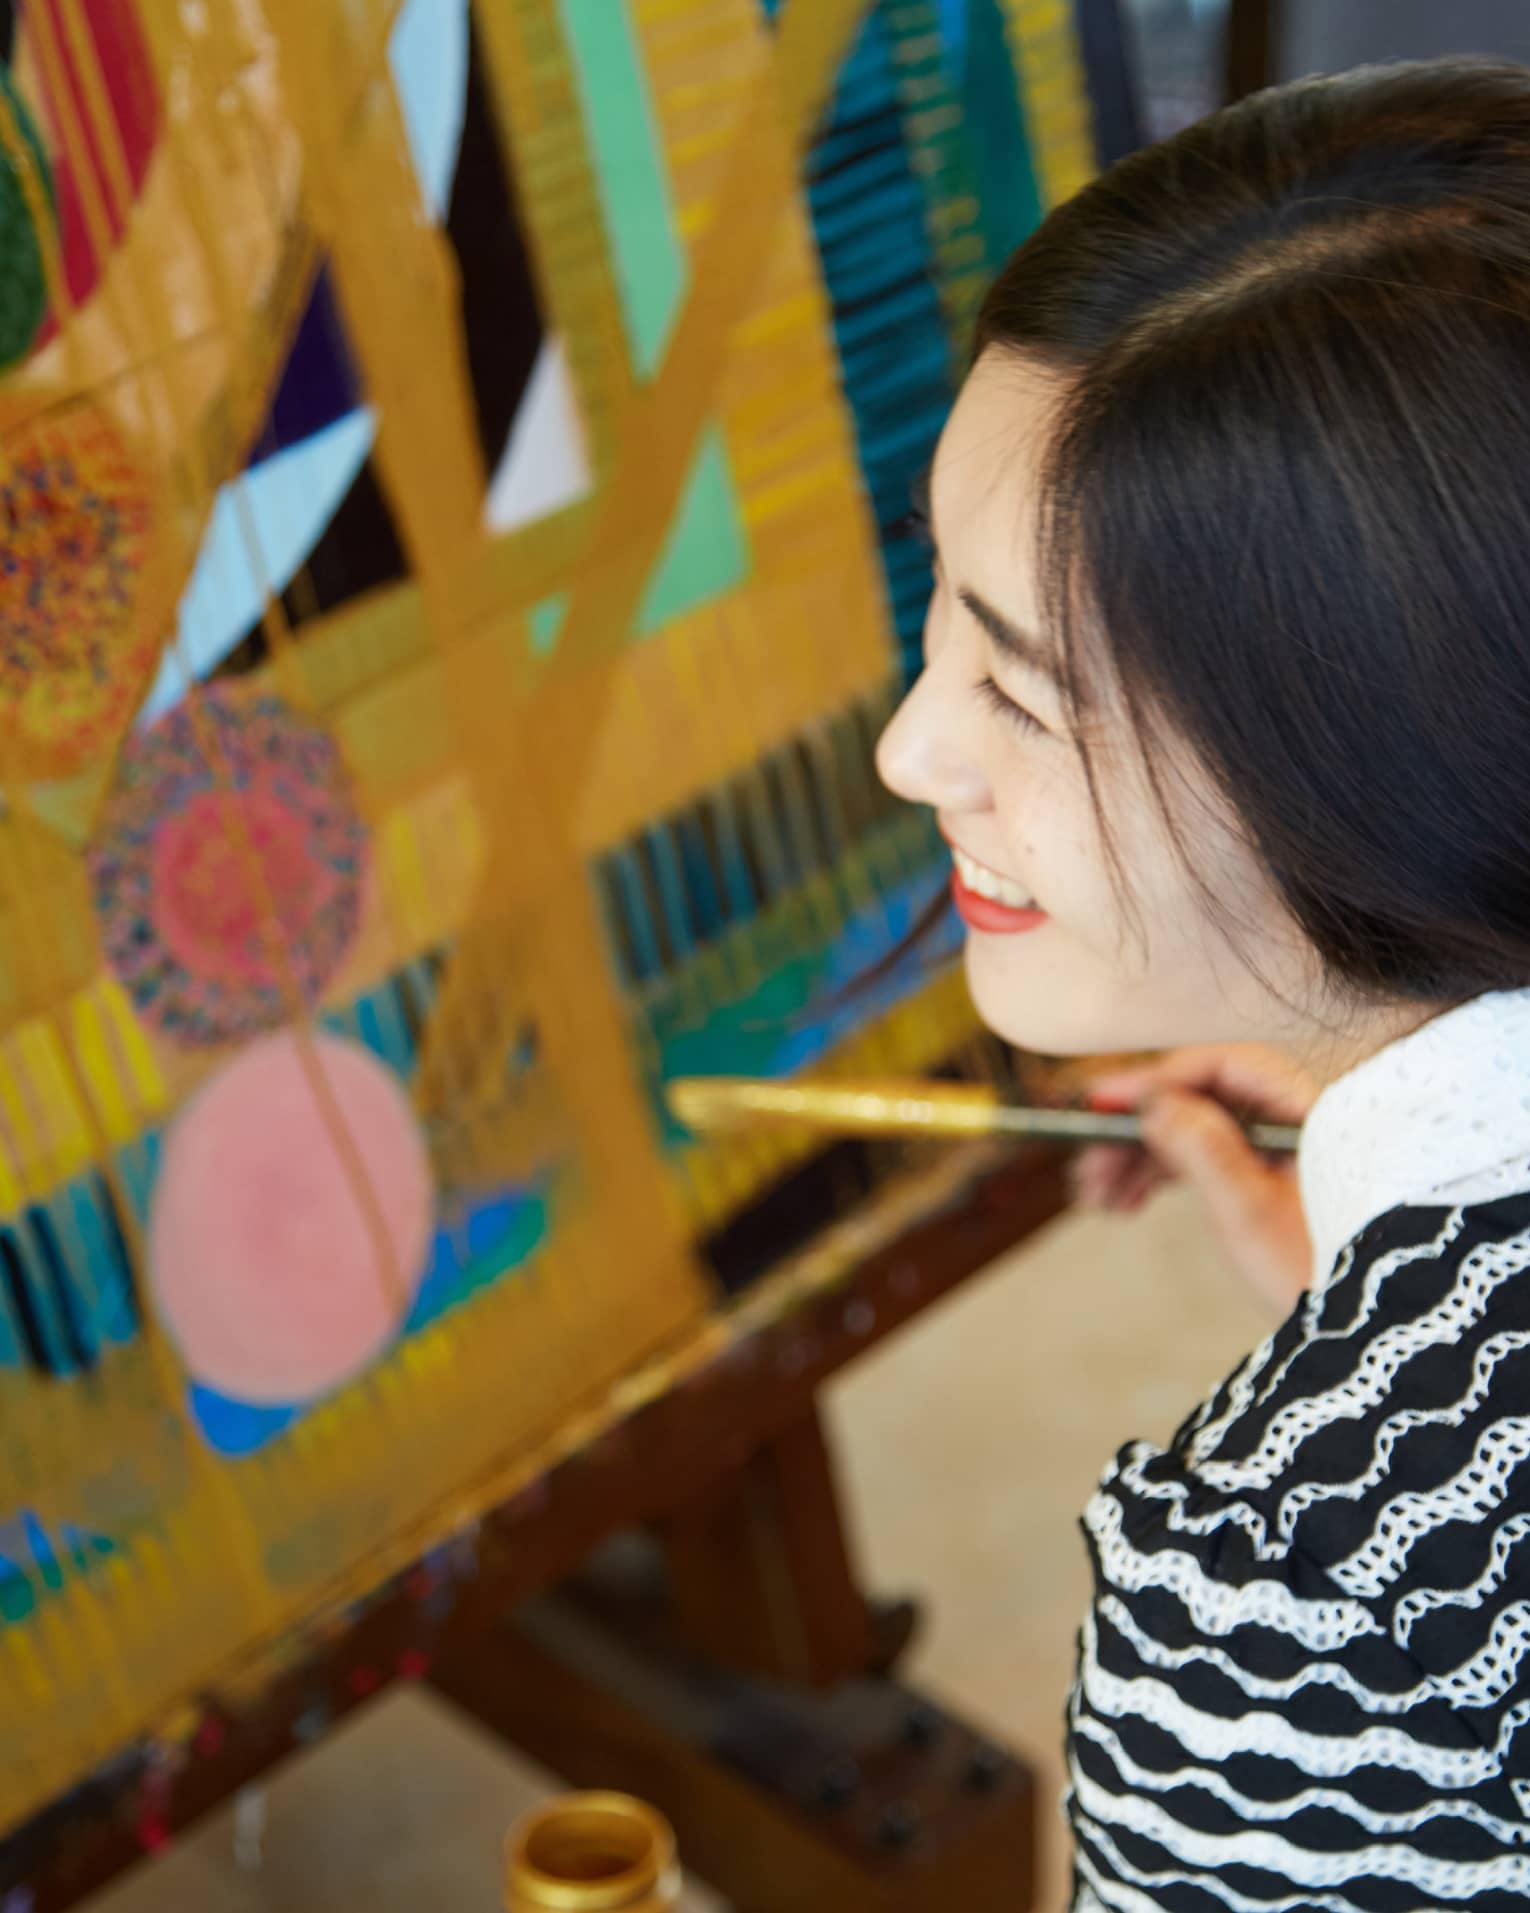 Side view of smiling woman's face as she holds paintbrush up to colourful painting